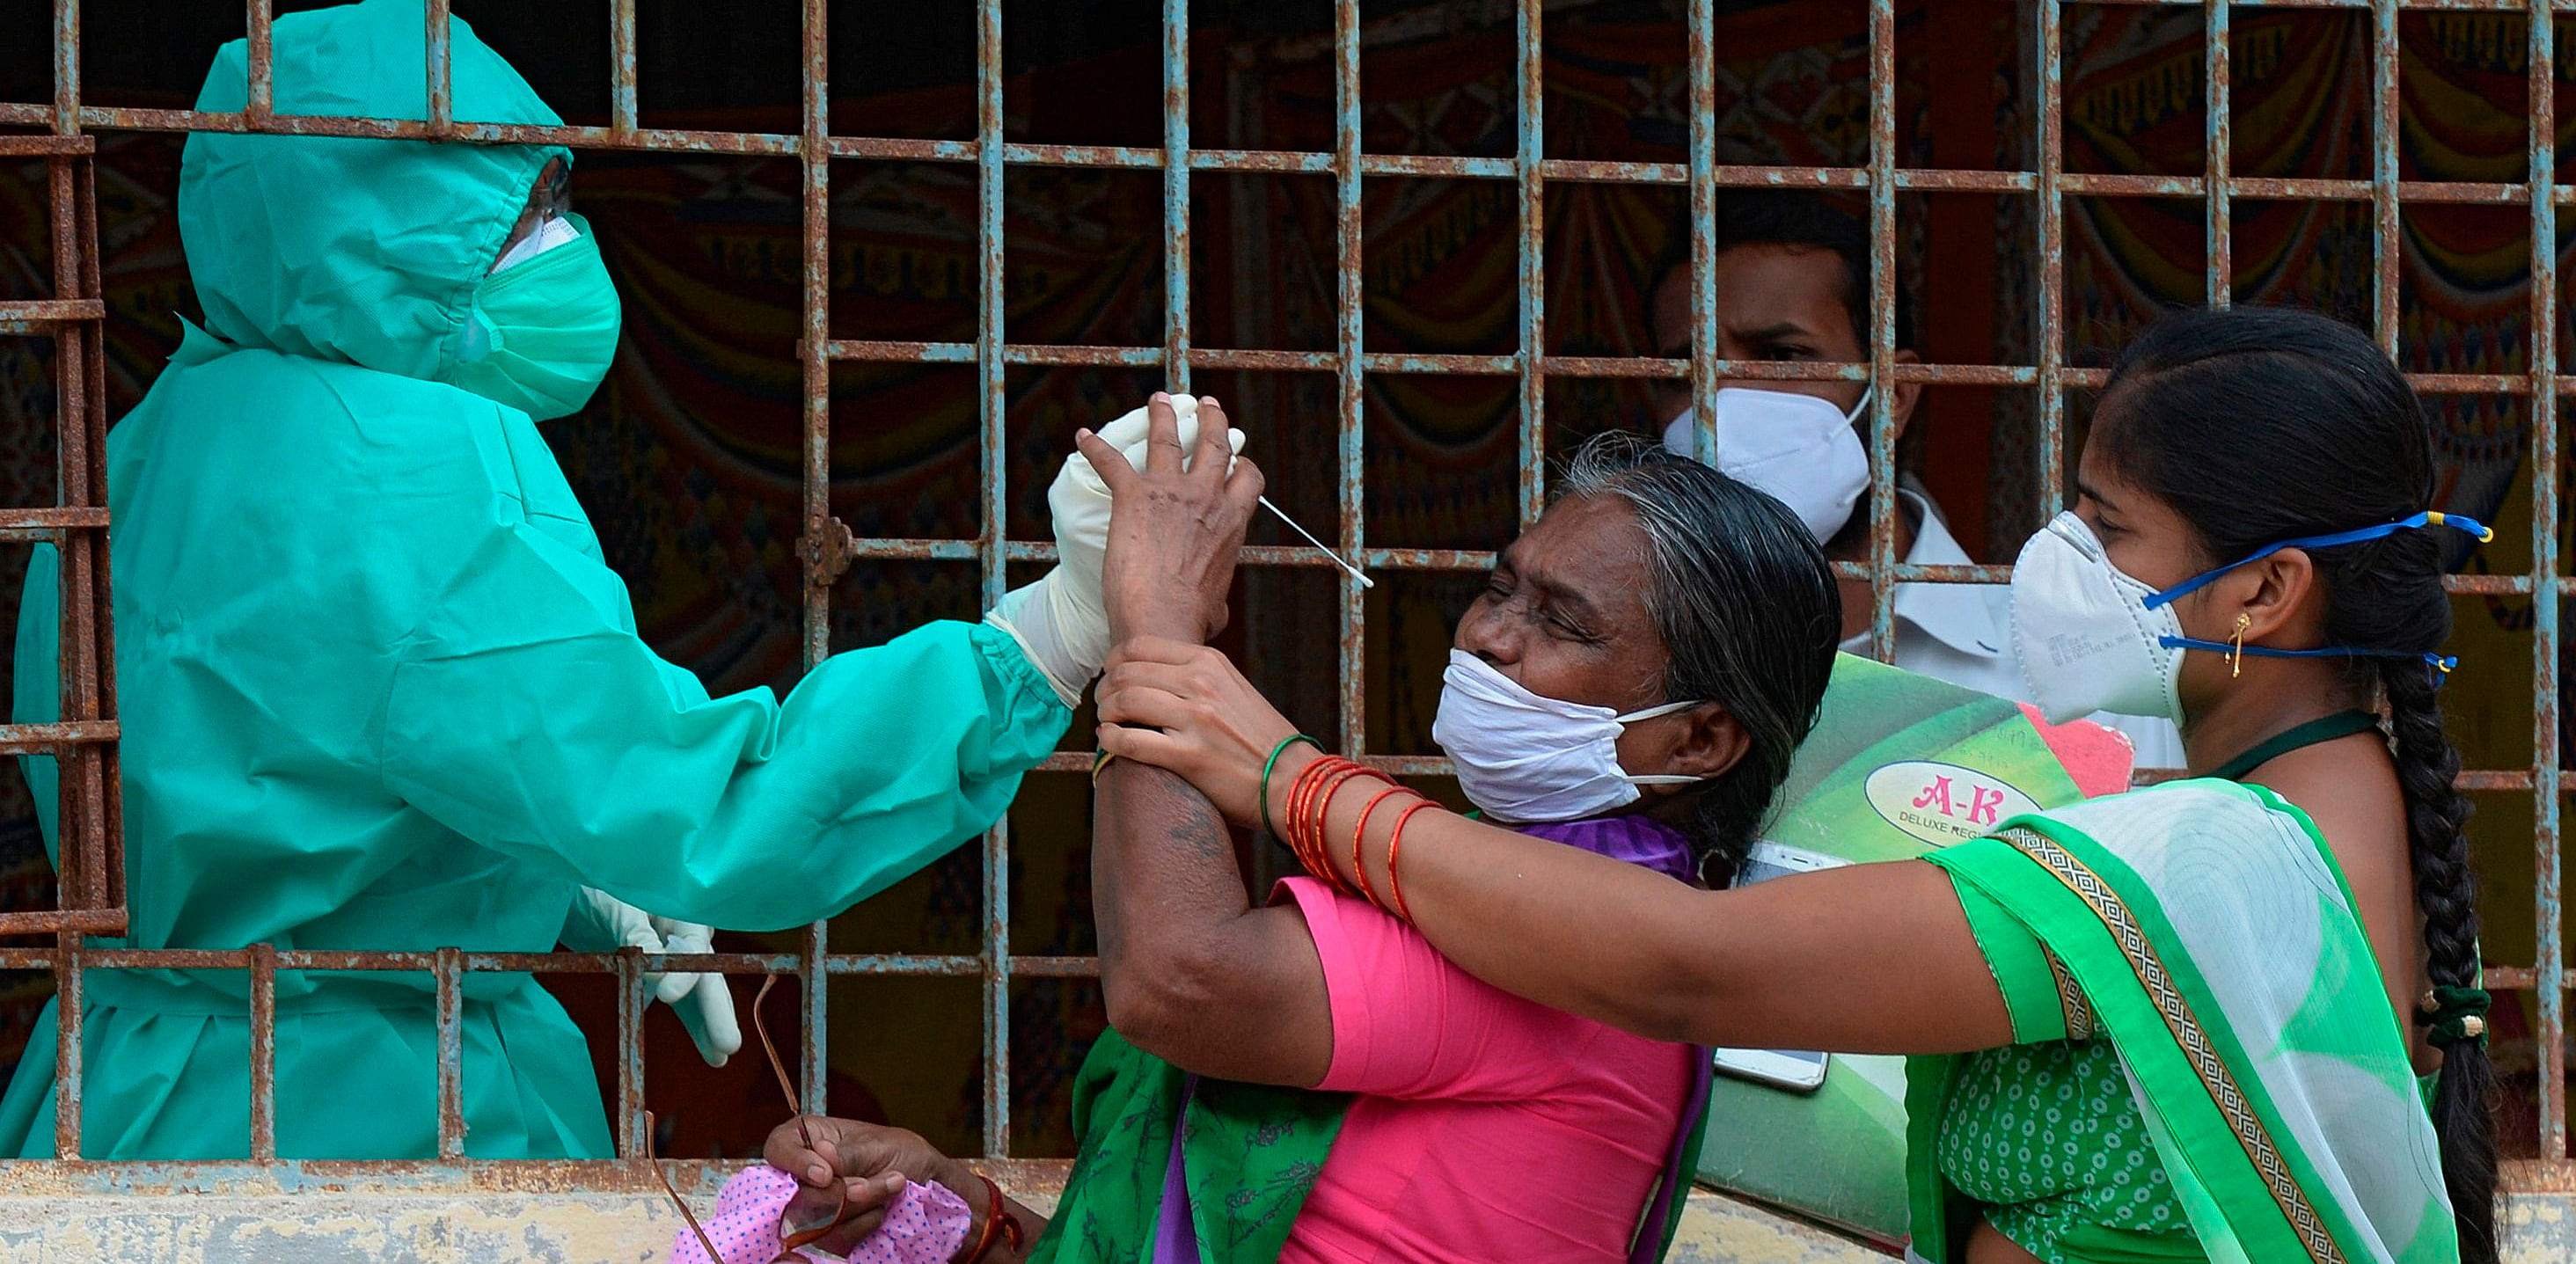 A woman (C) reacts as a health worker tries to collect her swab sample to test for the Covid-19 coronavirus at a slum area in Hyderabad. Credit: AFP